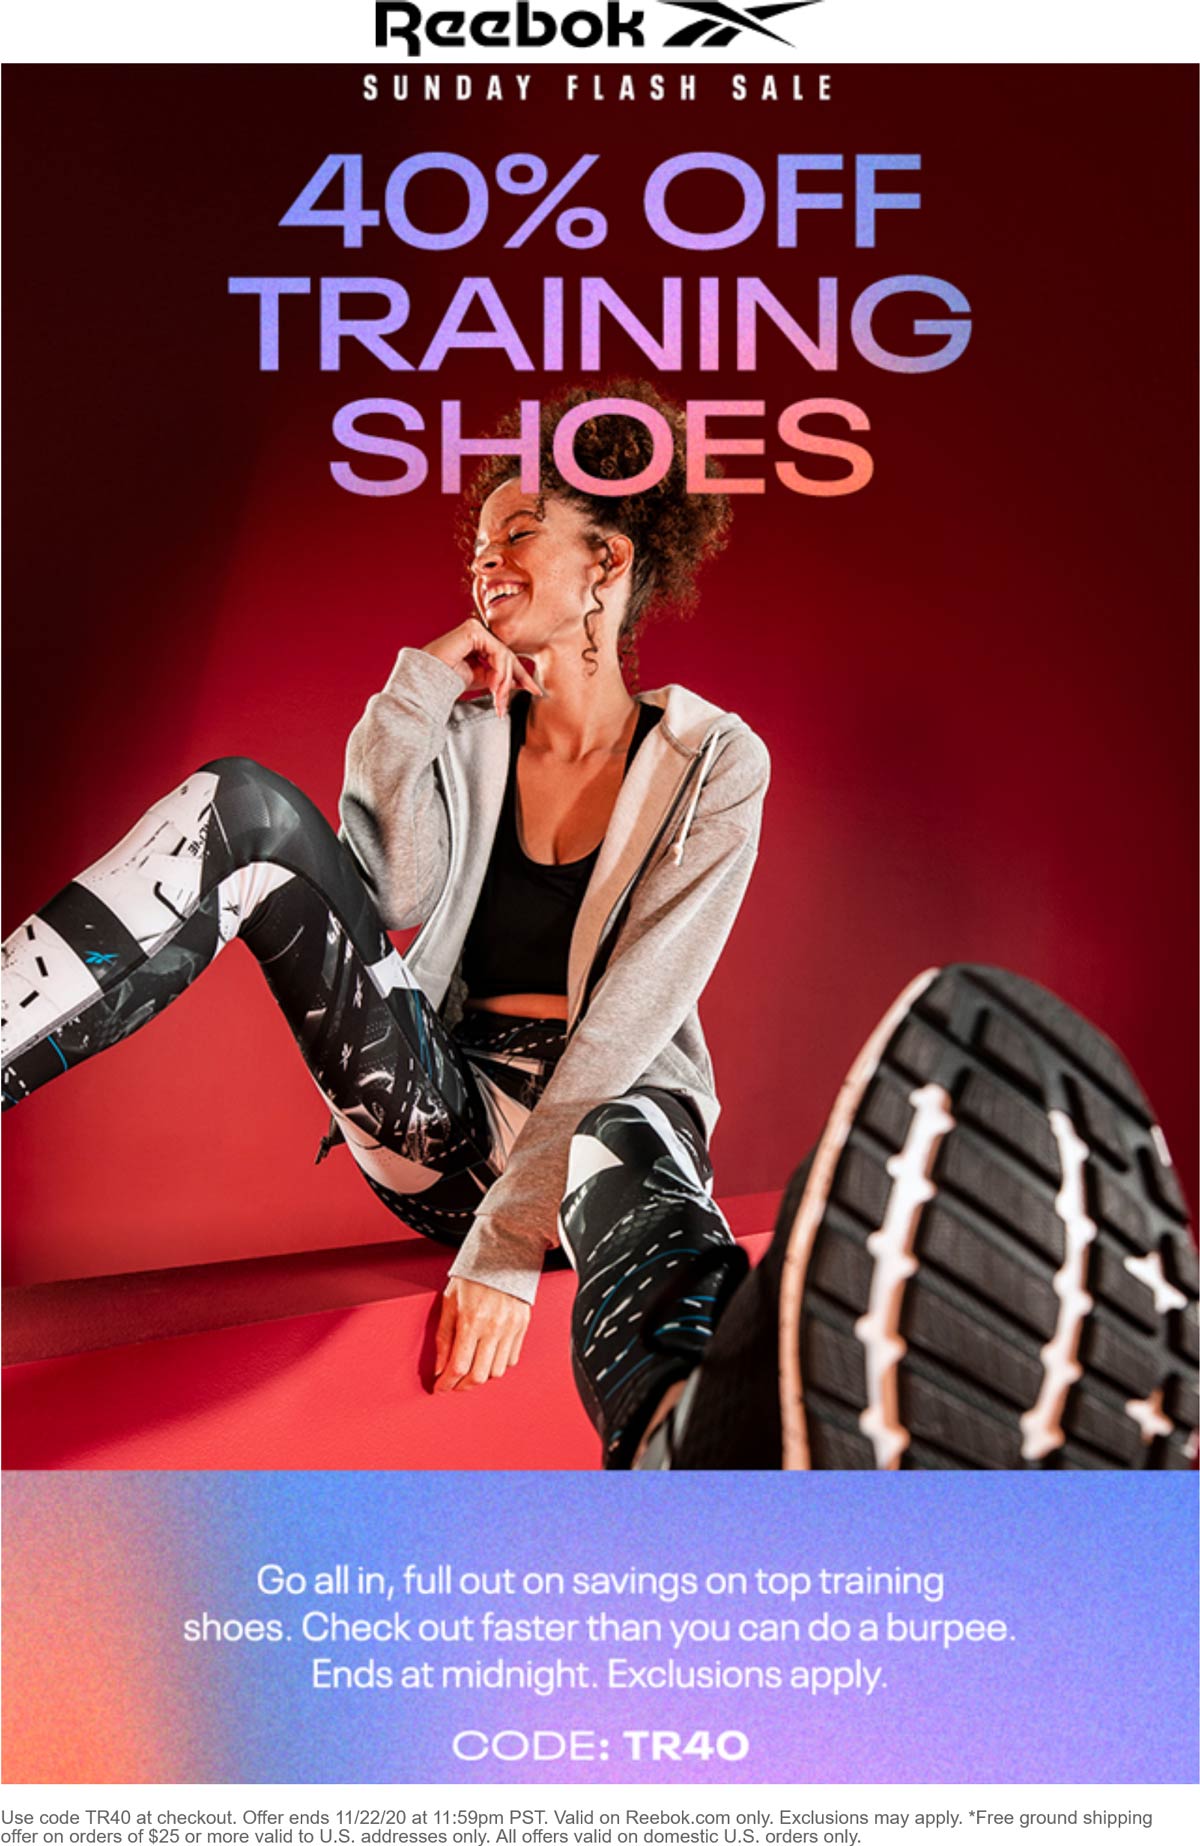 Reebok stores Coupon  40% off training shoes today at Reebok via promo code TR40 #reebok 